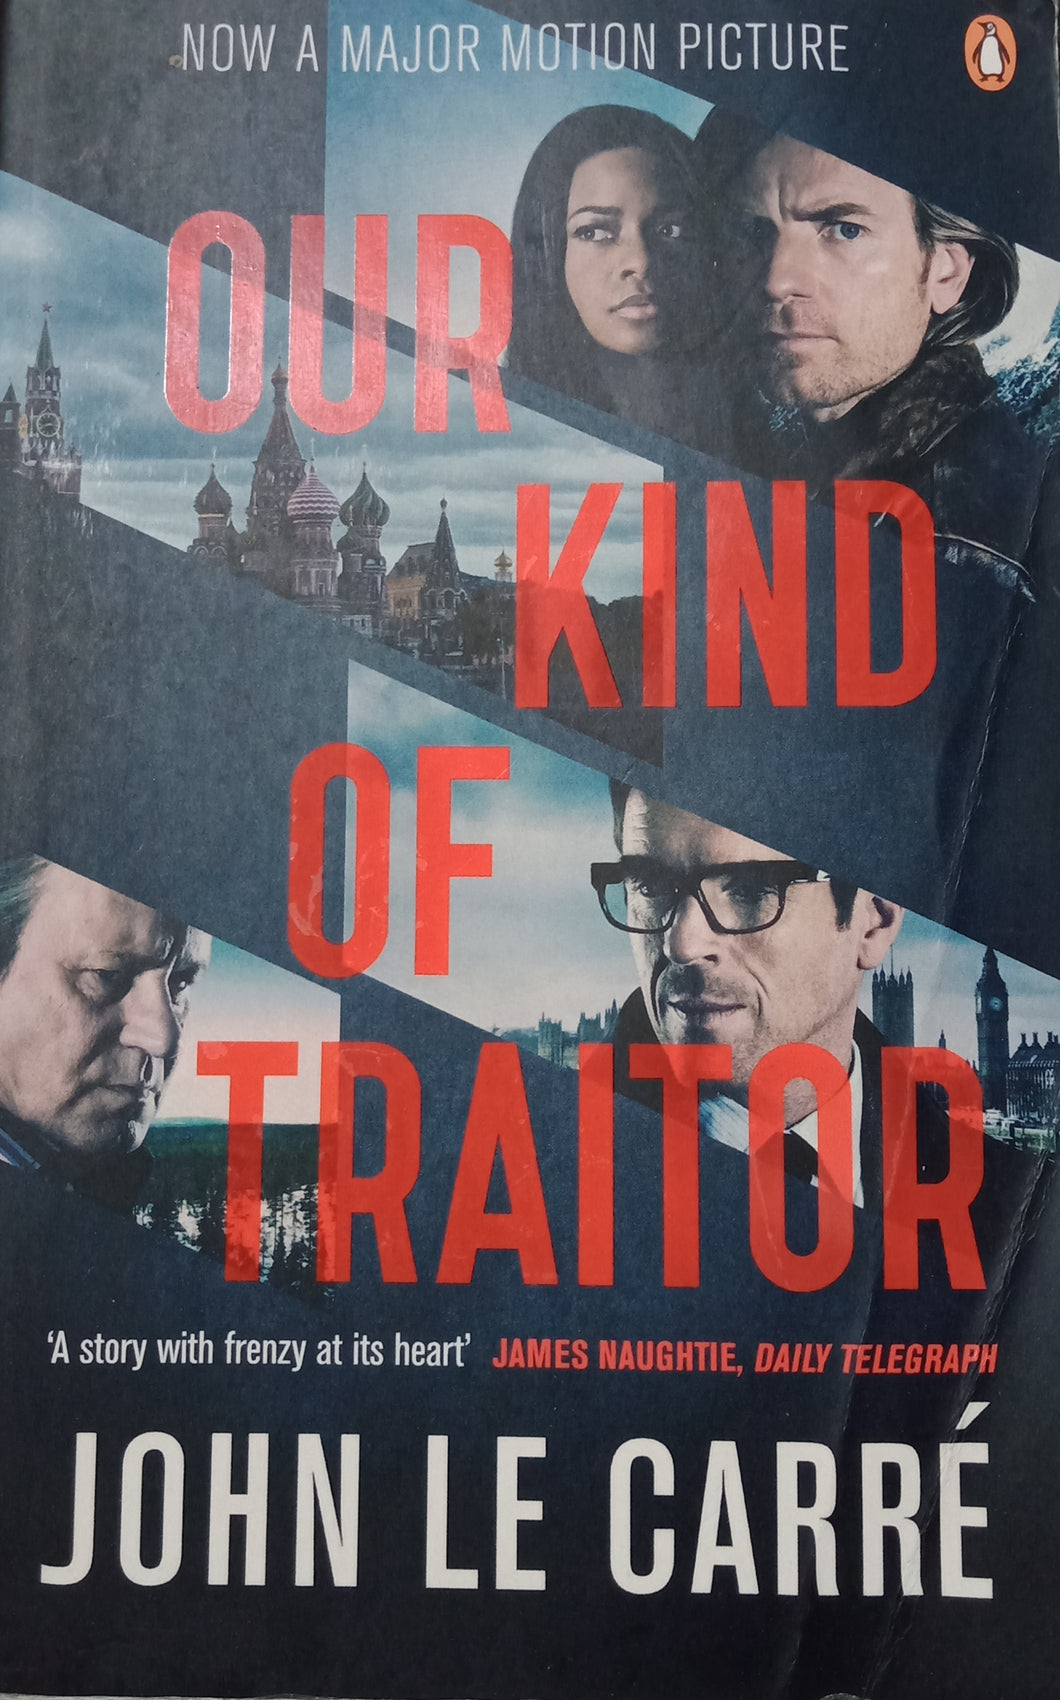 Our Kind Of Traitor by John Le Carre